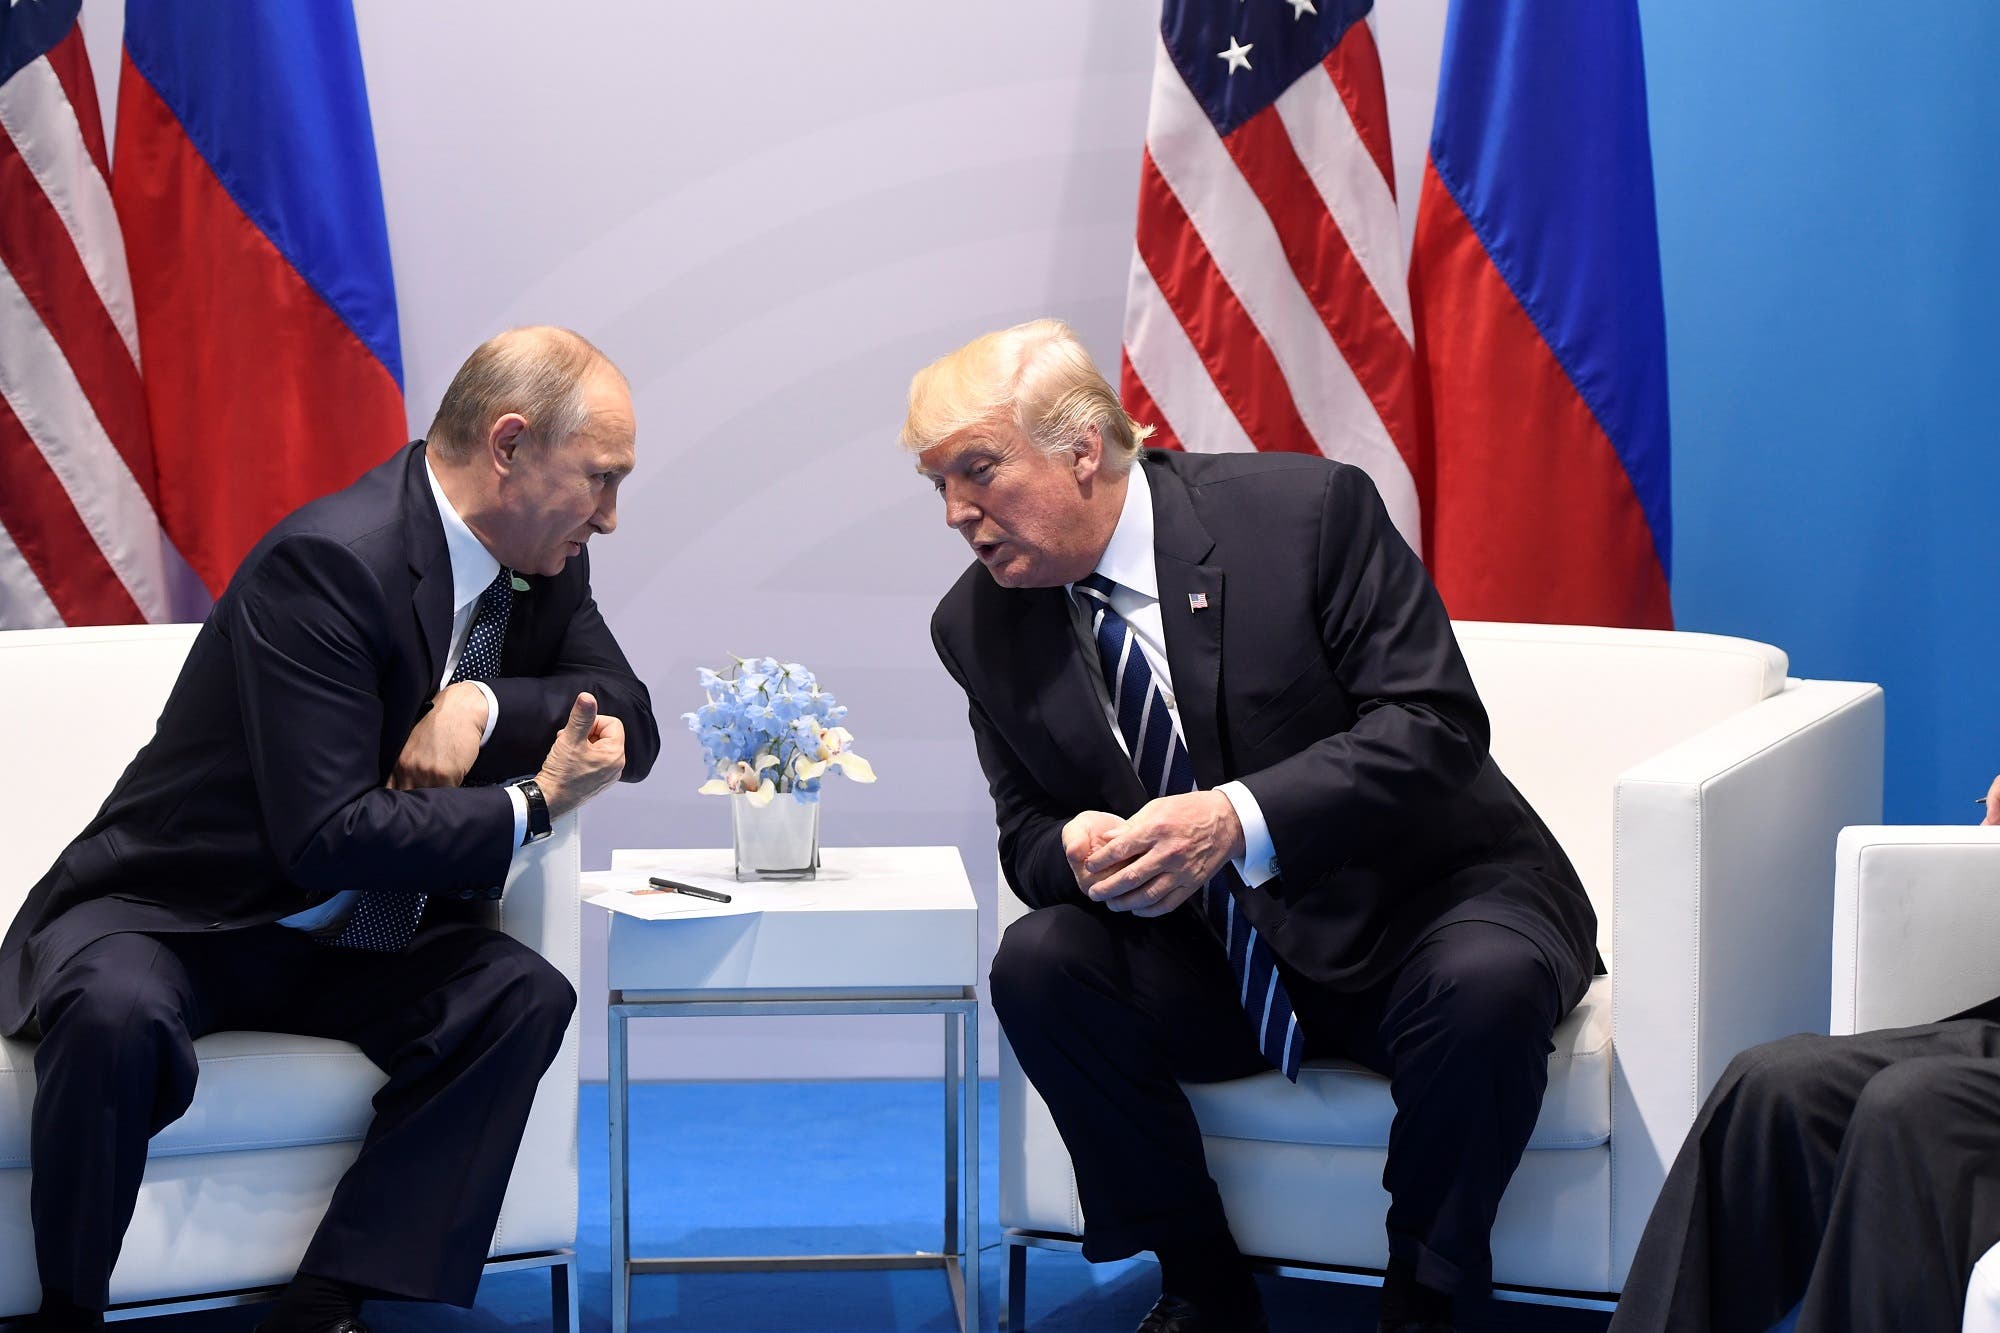 US President Donald Trump and Russia’s President Vladimir Putin hold a meeting on the sidelines of the G20 Summit in Hamburg, Germany, on July 7, 2017. (AFP)